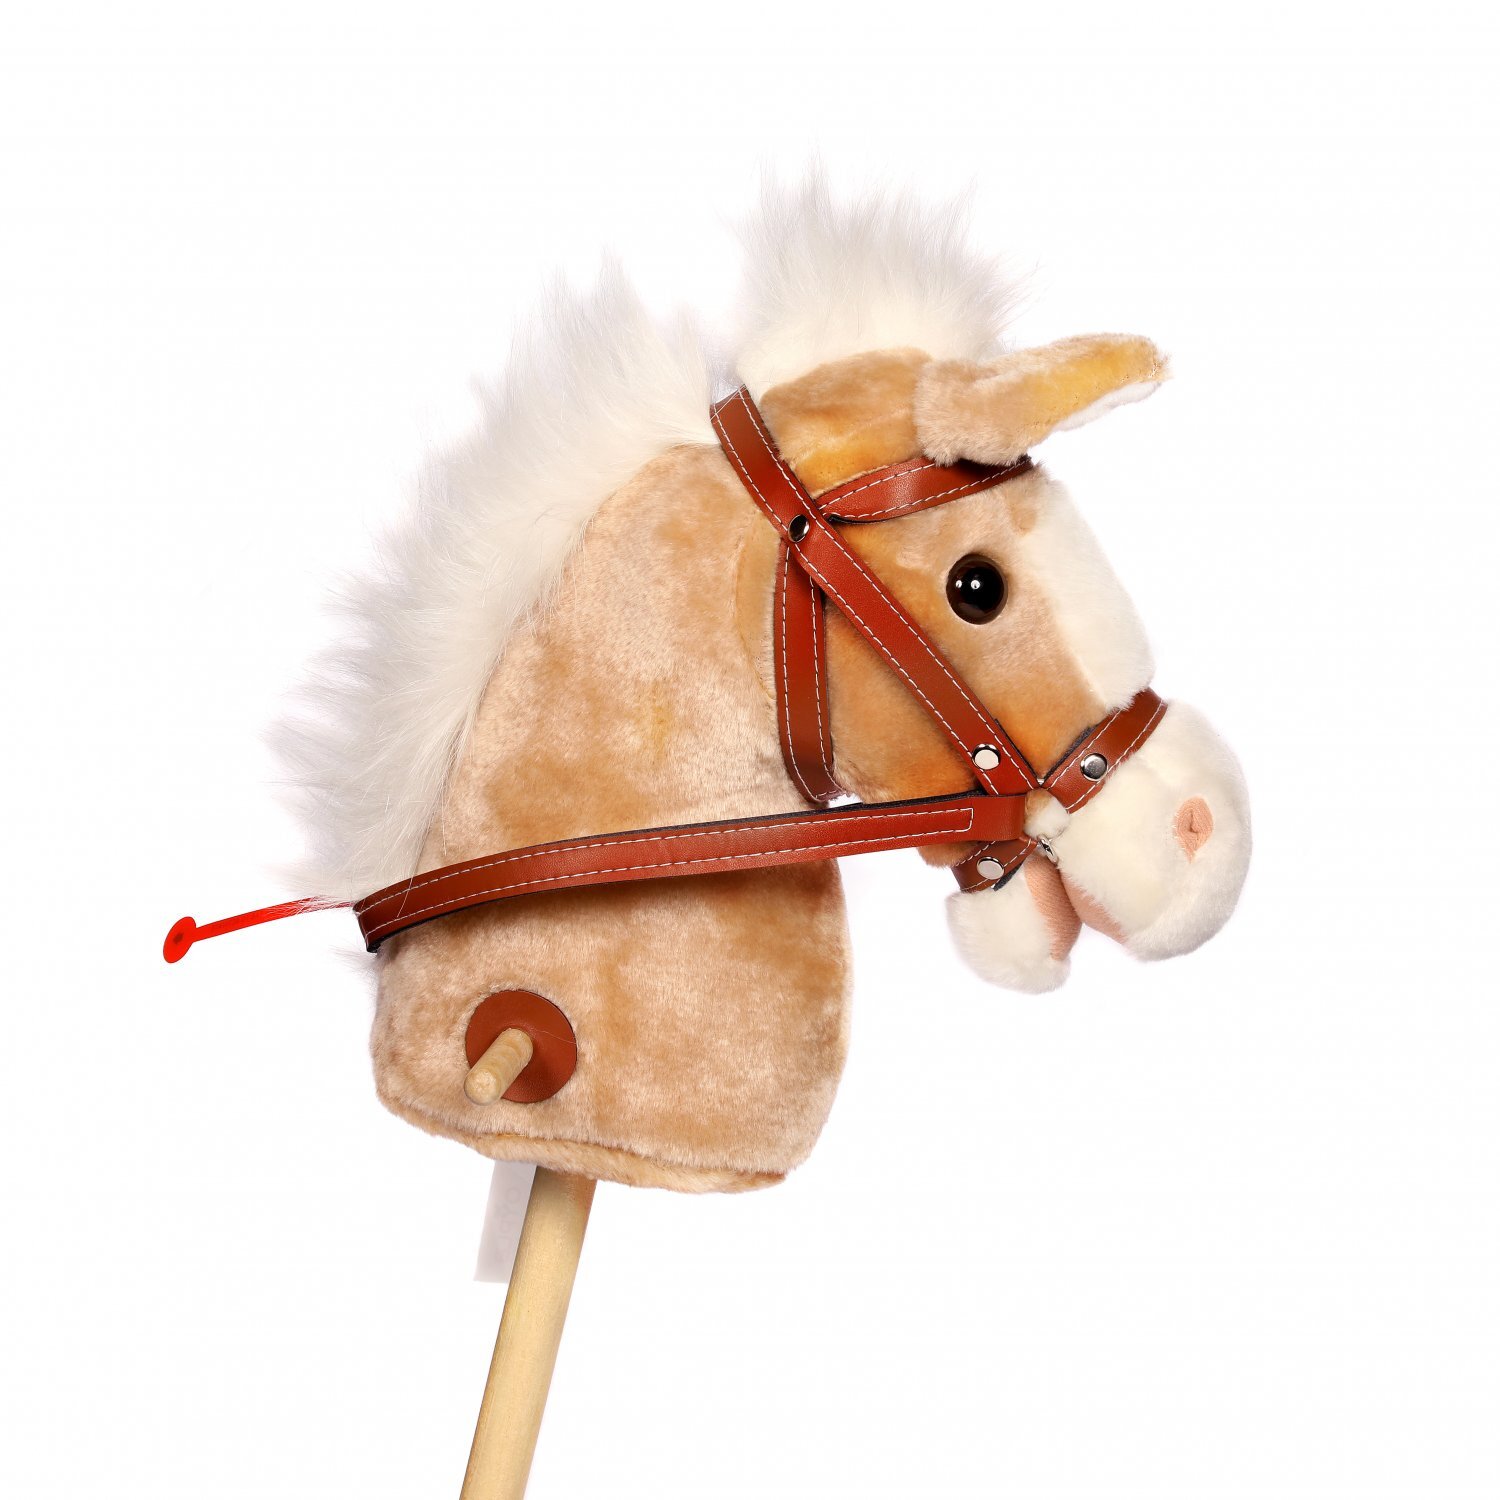 7" Musical Galloping Action Sound Western Horses Kids Toys Random Color 1PC 